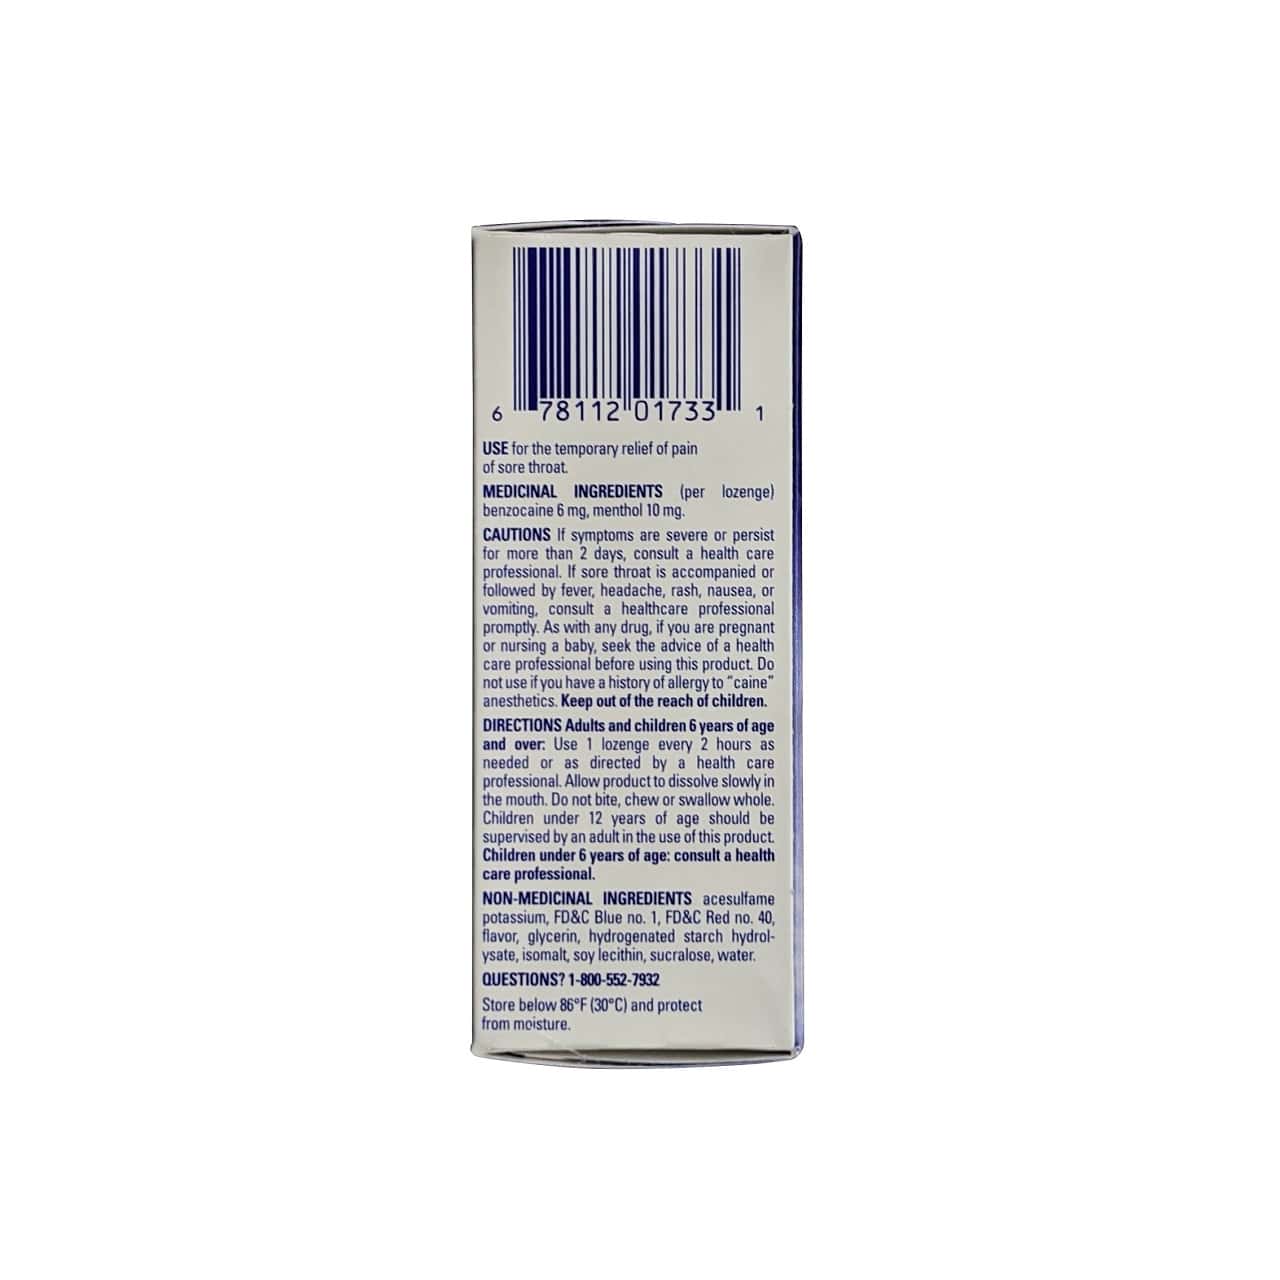 Uses, ingredients, cautions, directions for Chloraseptic Methol/Benzocaine Oral Anesthetic Lozenges Berry Cherry Flavour (16 lozenges) in English